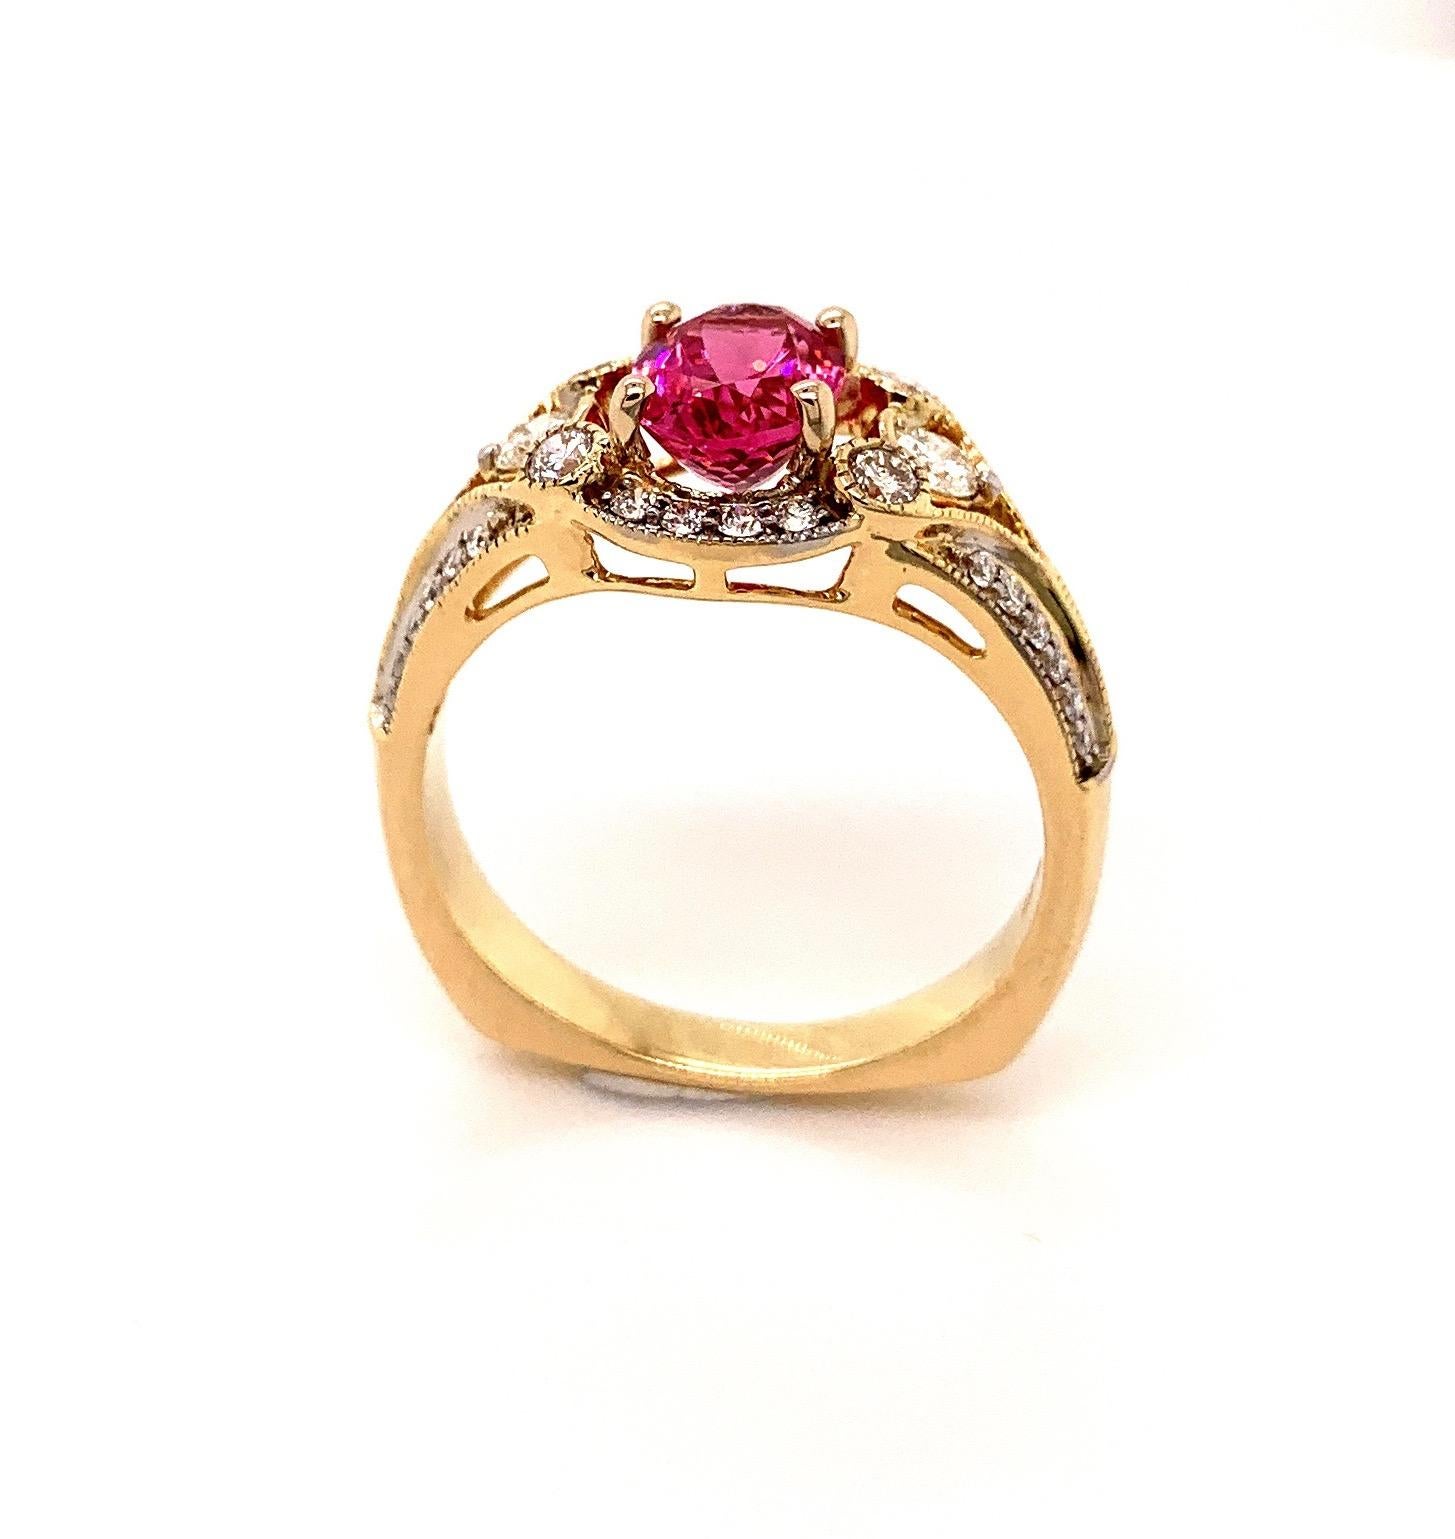 Mahenge and Morogoro in Tanzania are two mining areas that produce nice vivid pink Spinels. The mines are not producing the same amount of rough as a few years ago and with that the nicer larger stones are harder to get. 
This 2.26 carats purplish